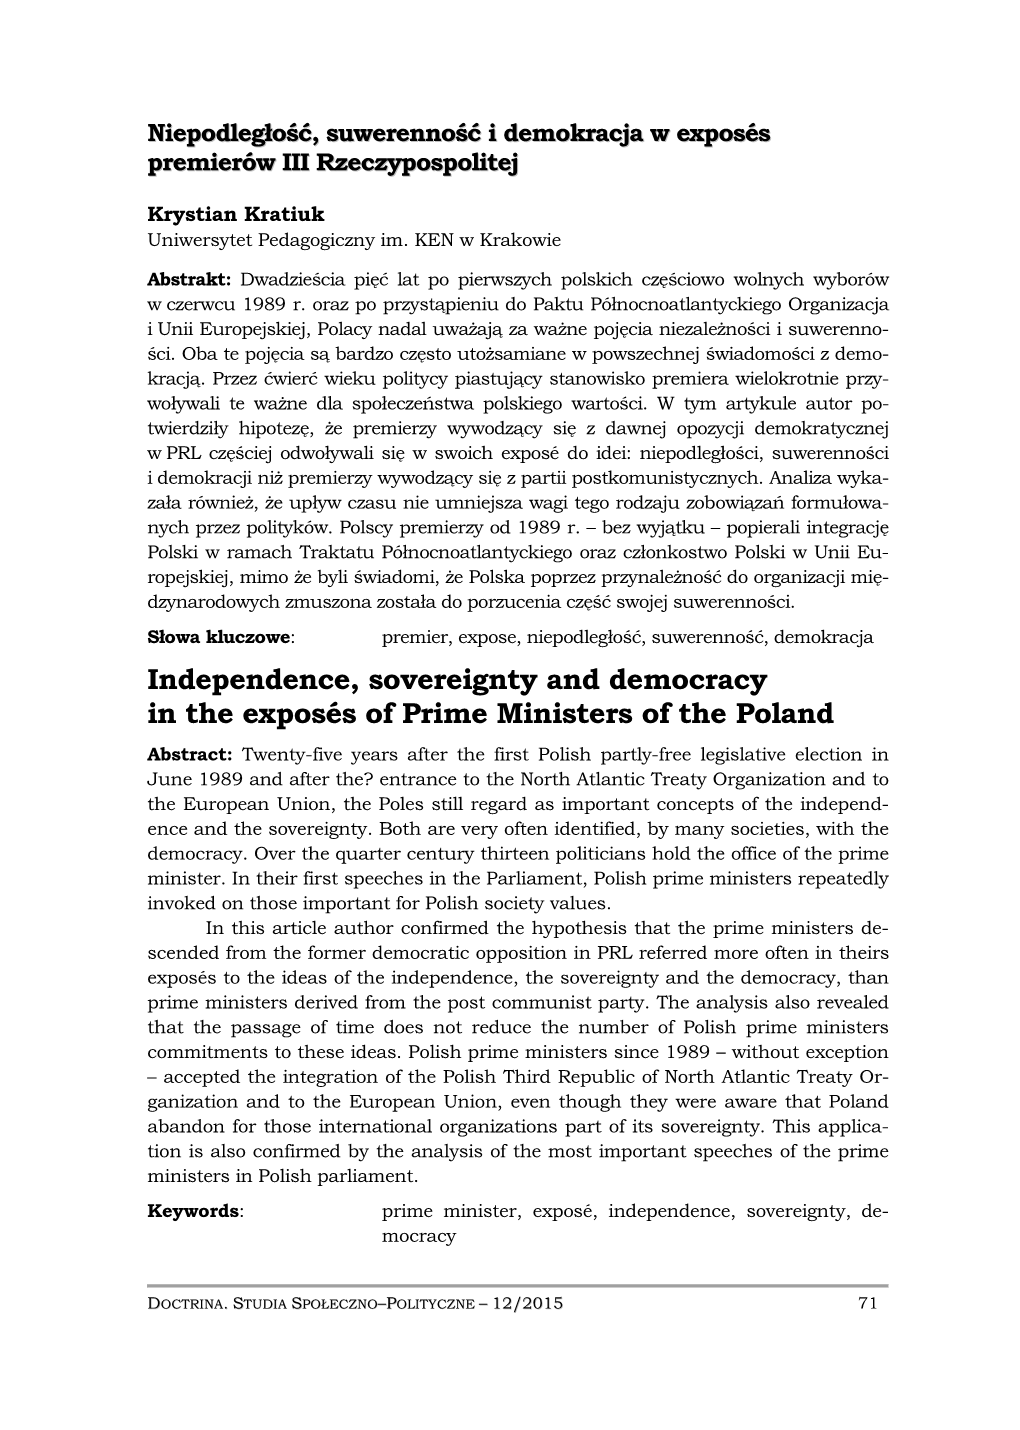 Independence, Sovereignty and Democracy in the Exposés of Prime